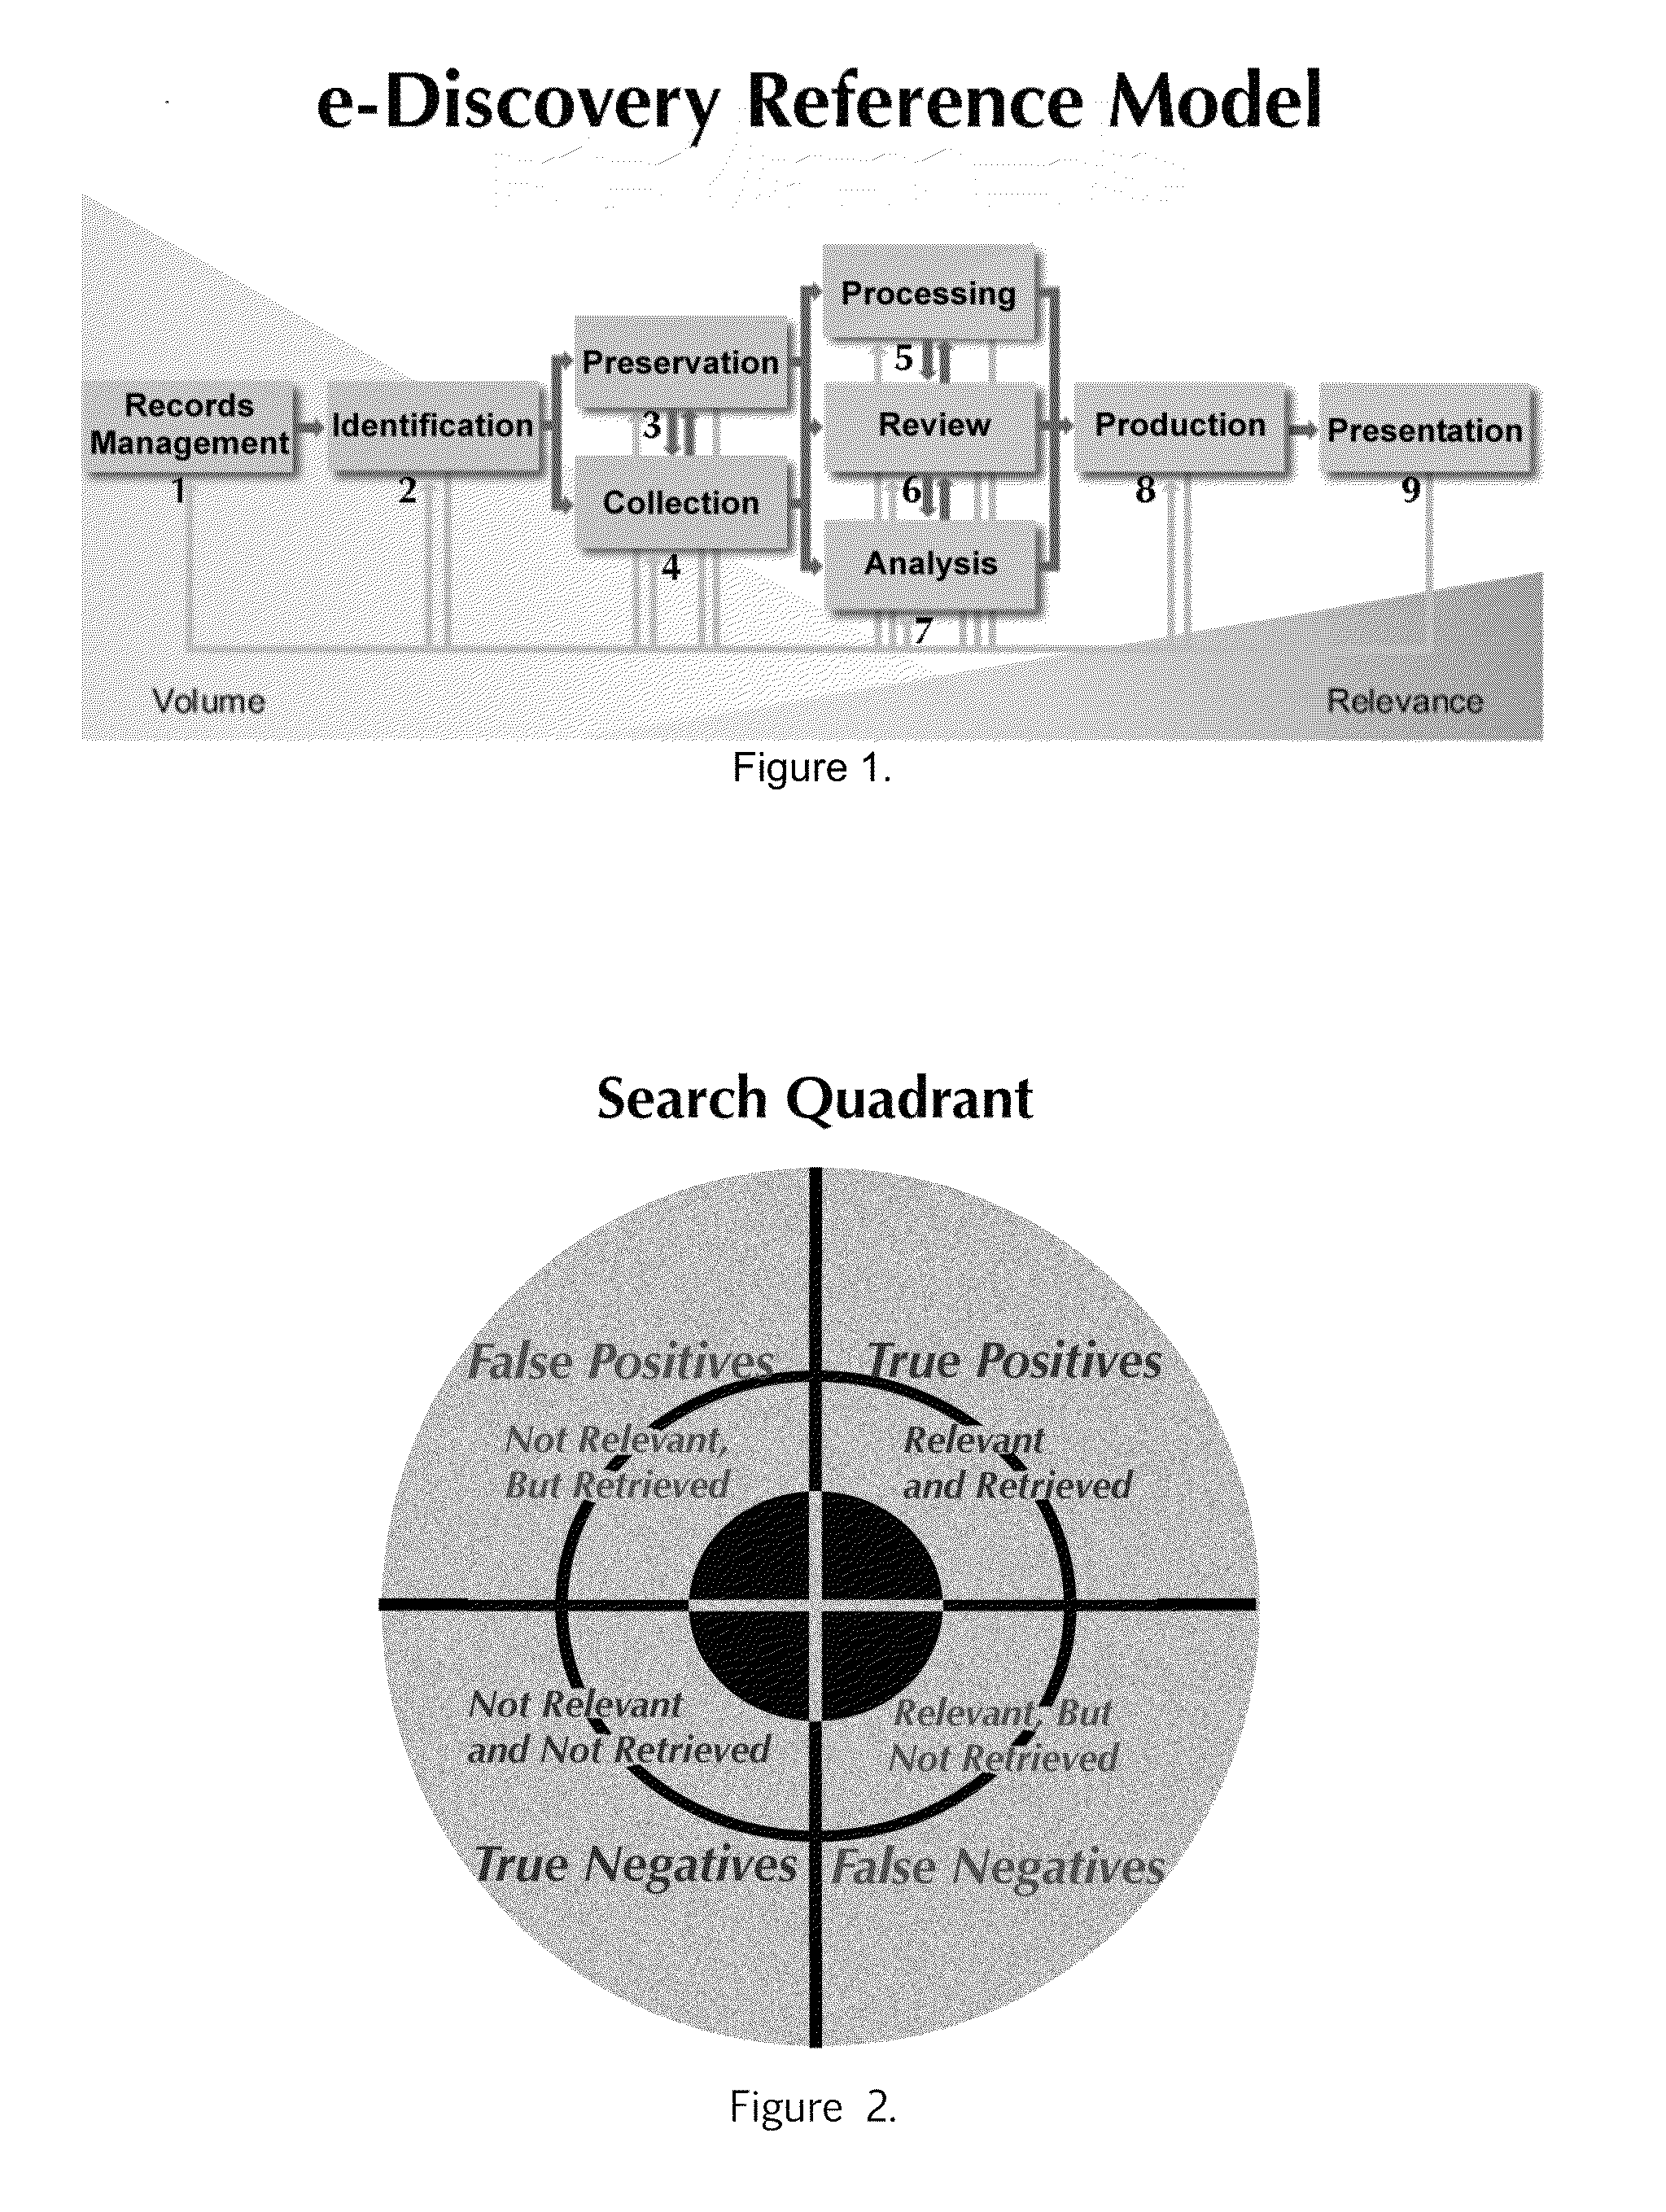 System and method for establishing, managing, and controlling the time, cost, and quality of information retrieval and production in electronic discovery